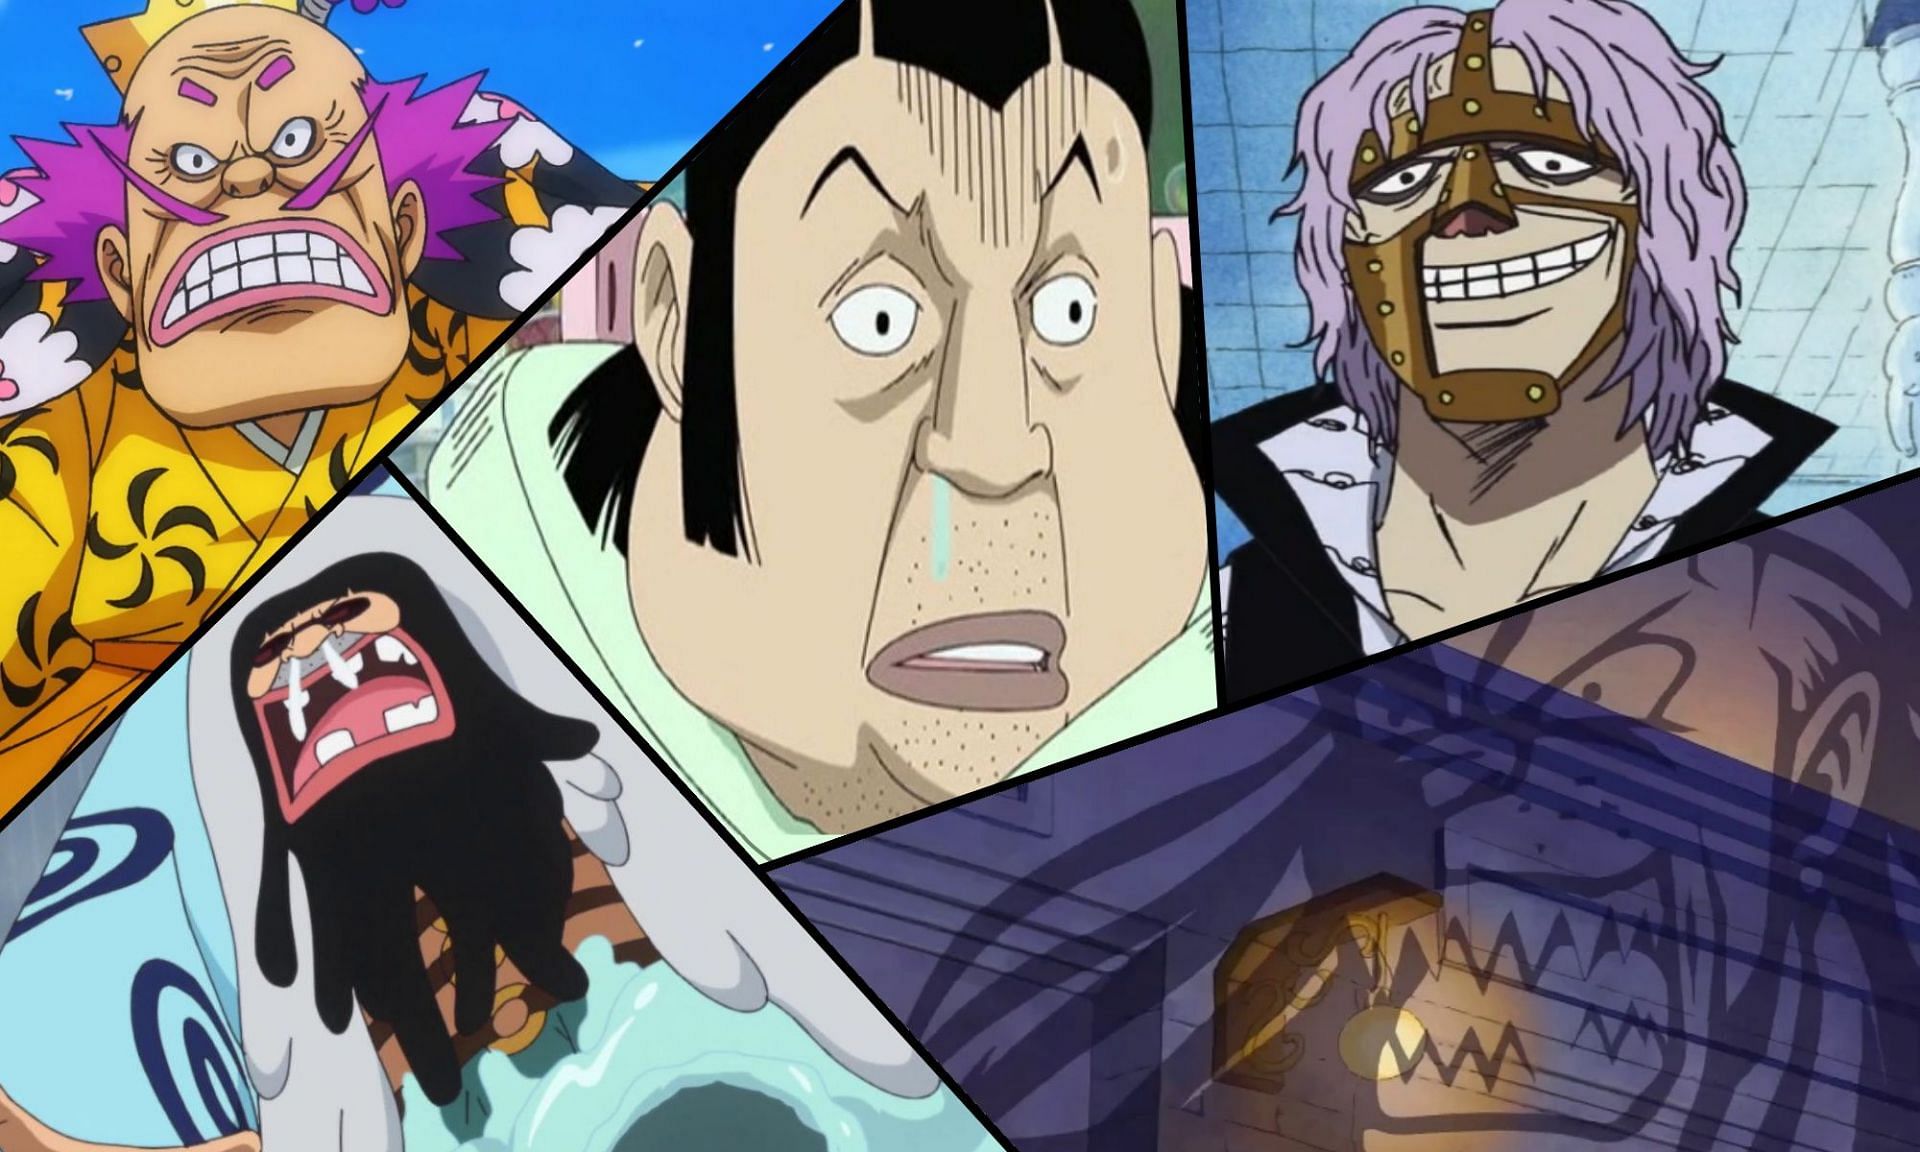 10 One Piece characters who were disliked but redeemed themselves